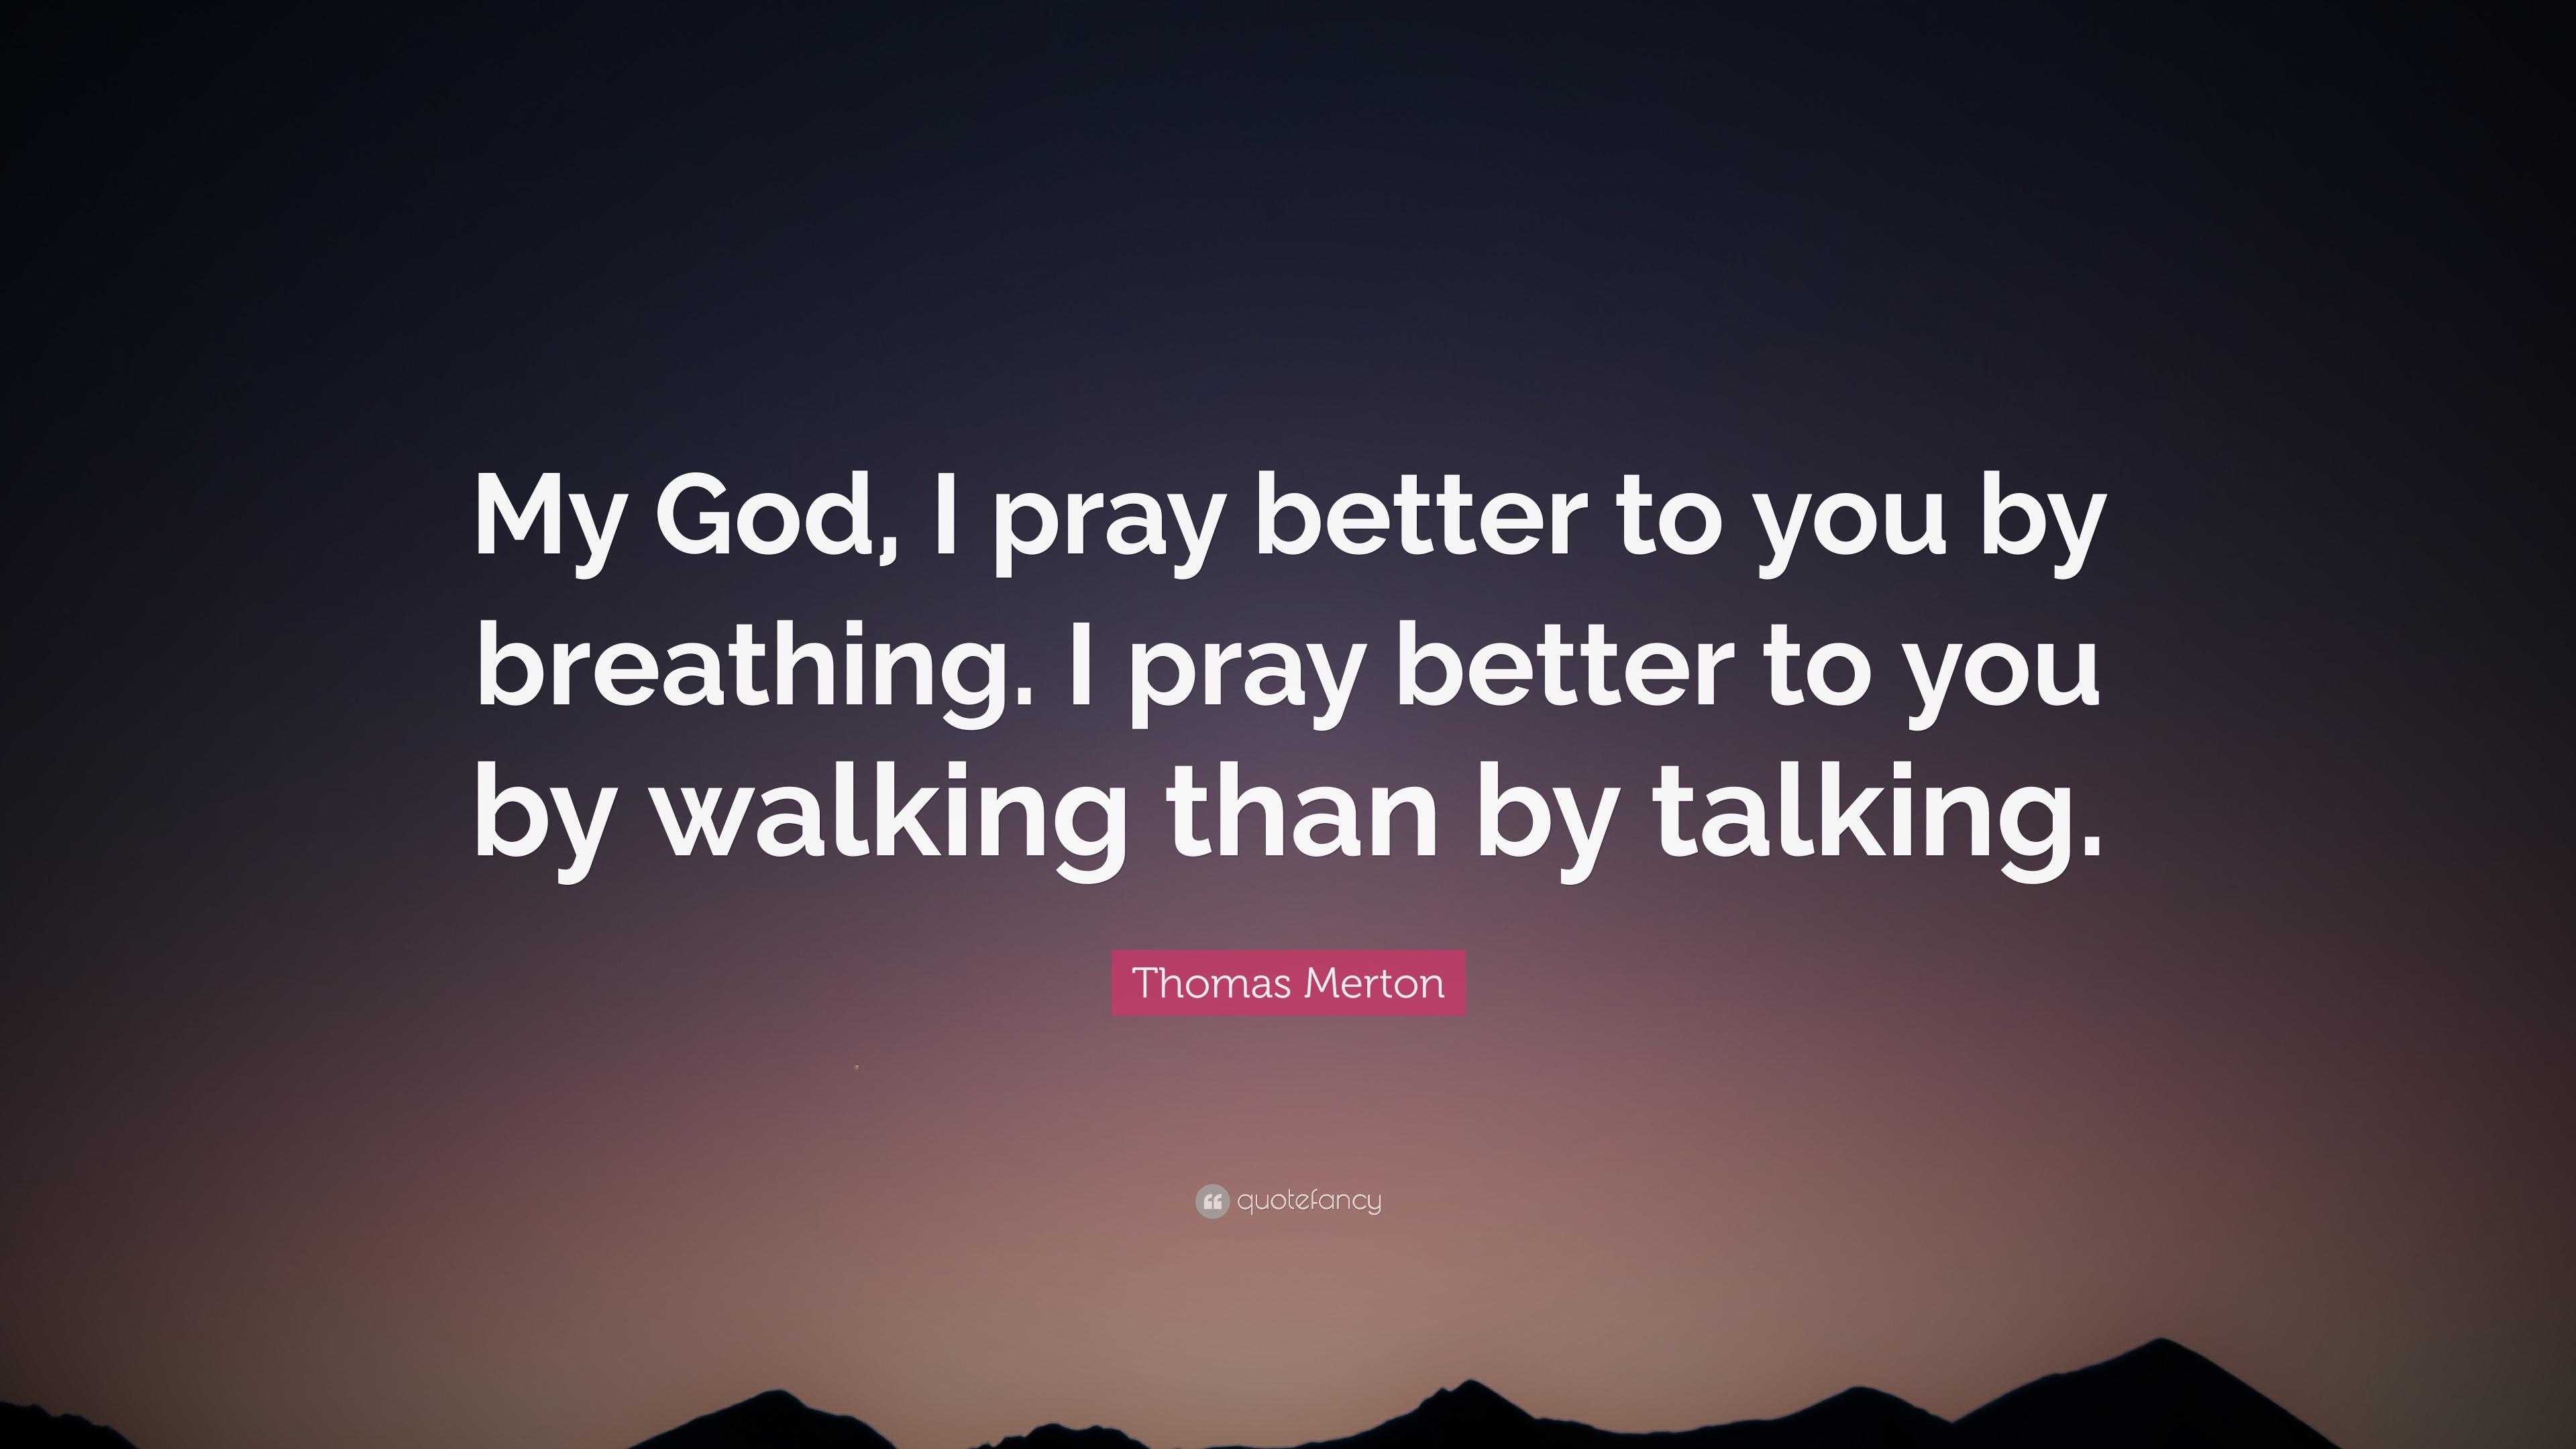 Thomas Merton Quote: “My God, I pray better to you by breathing. I